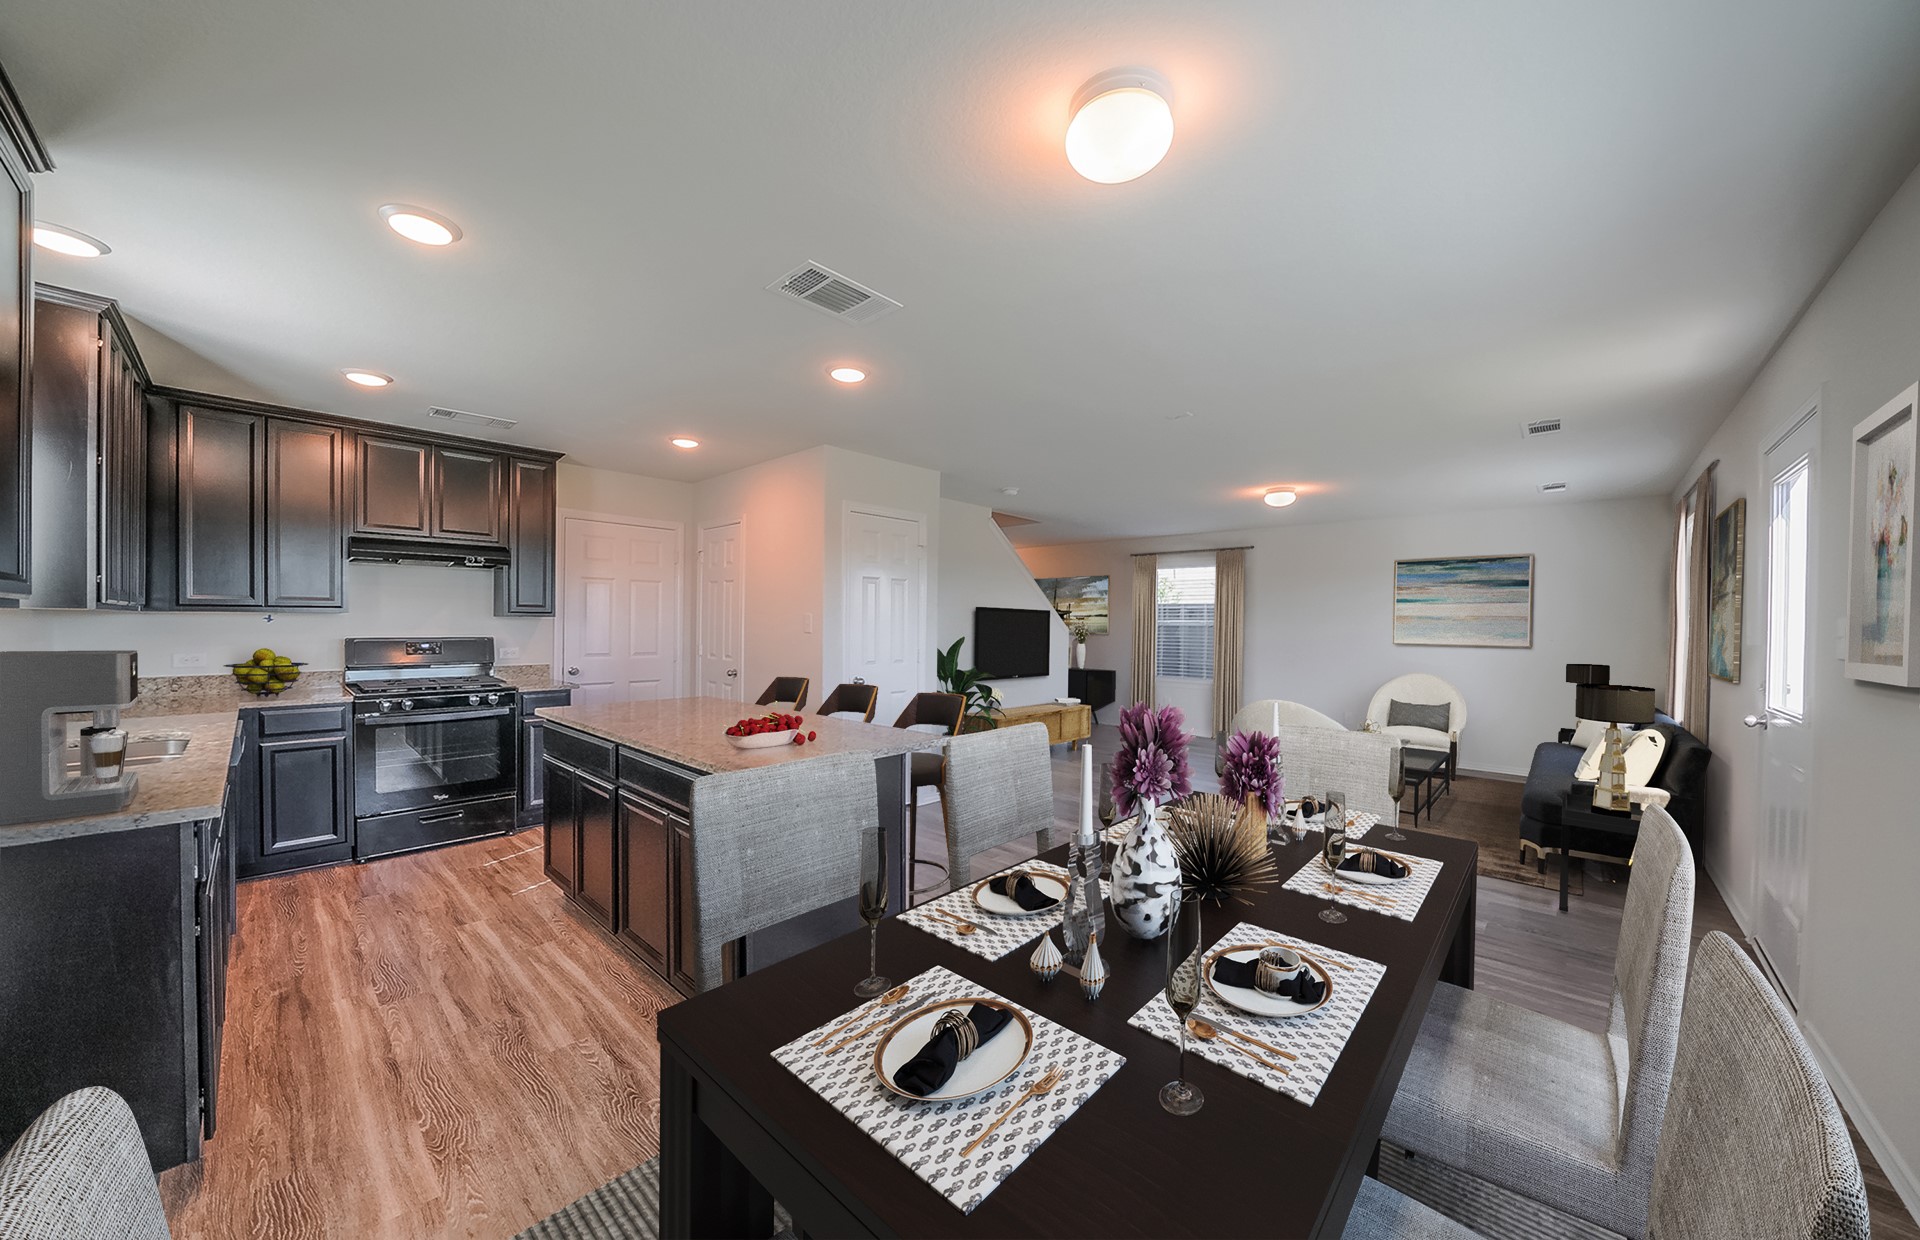 Representative Image - If you have additional questions regarding 7308 Hobby Wind Ridge  in Houston or would like to tour the property with us call 800-660-1022 and reference MLS# 39043560.